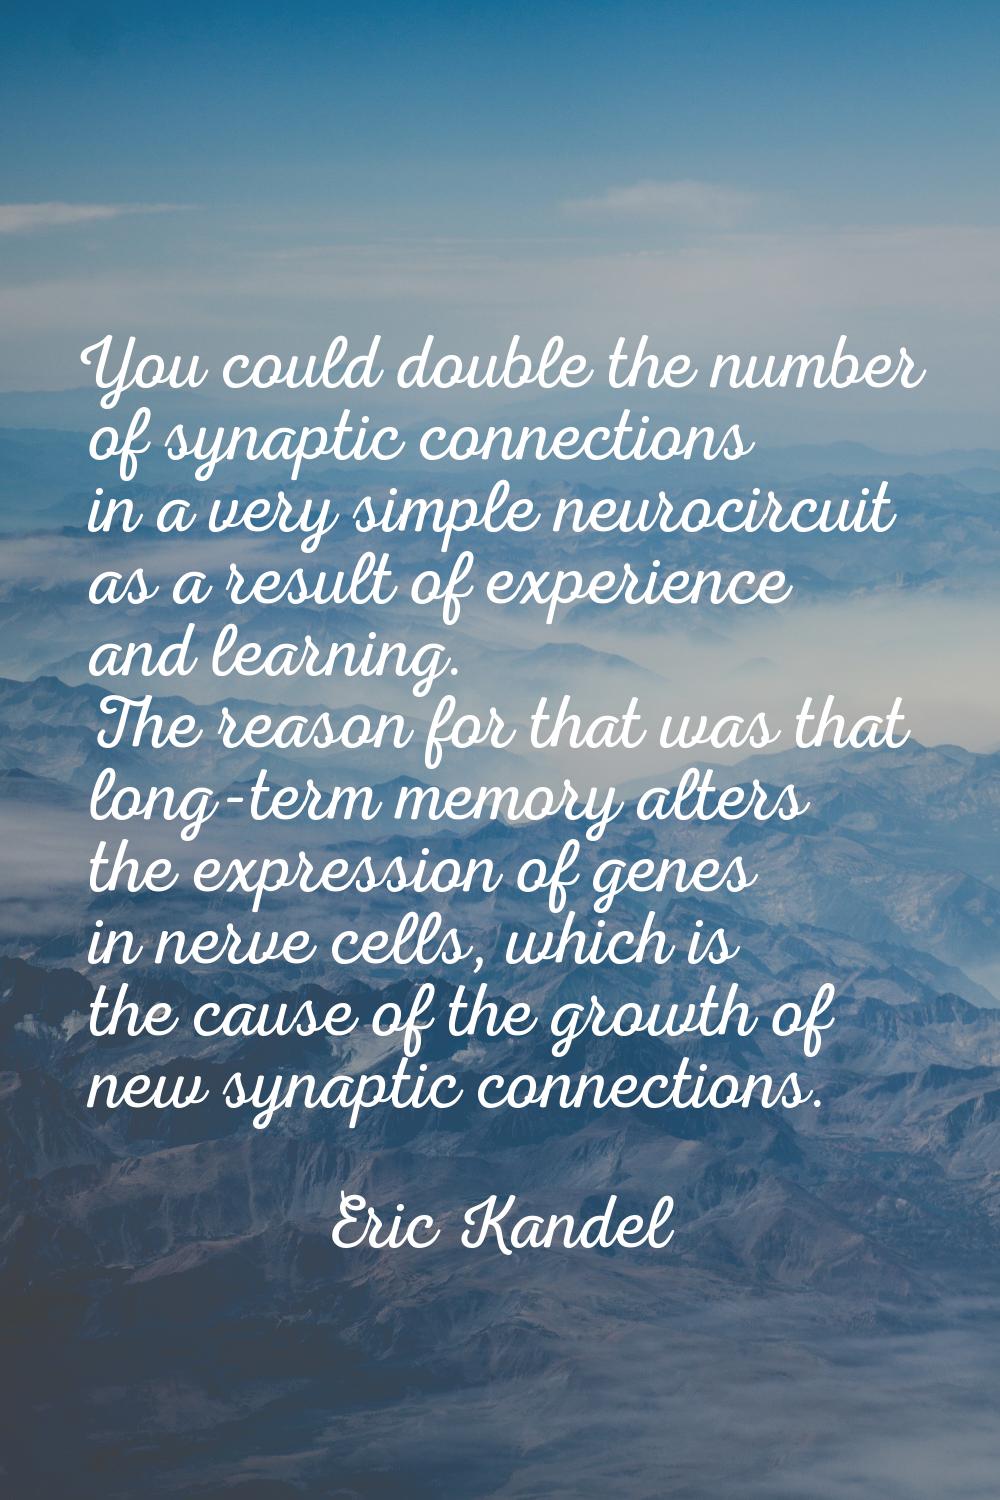 You could double the number of synaptic connections in a very simple neurocircuit as a result of ex